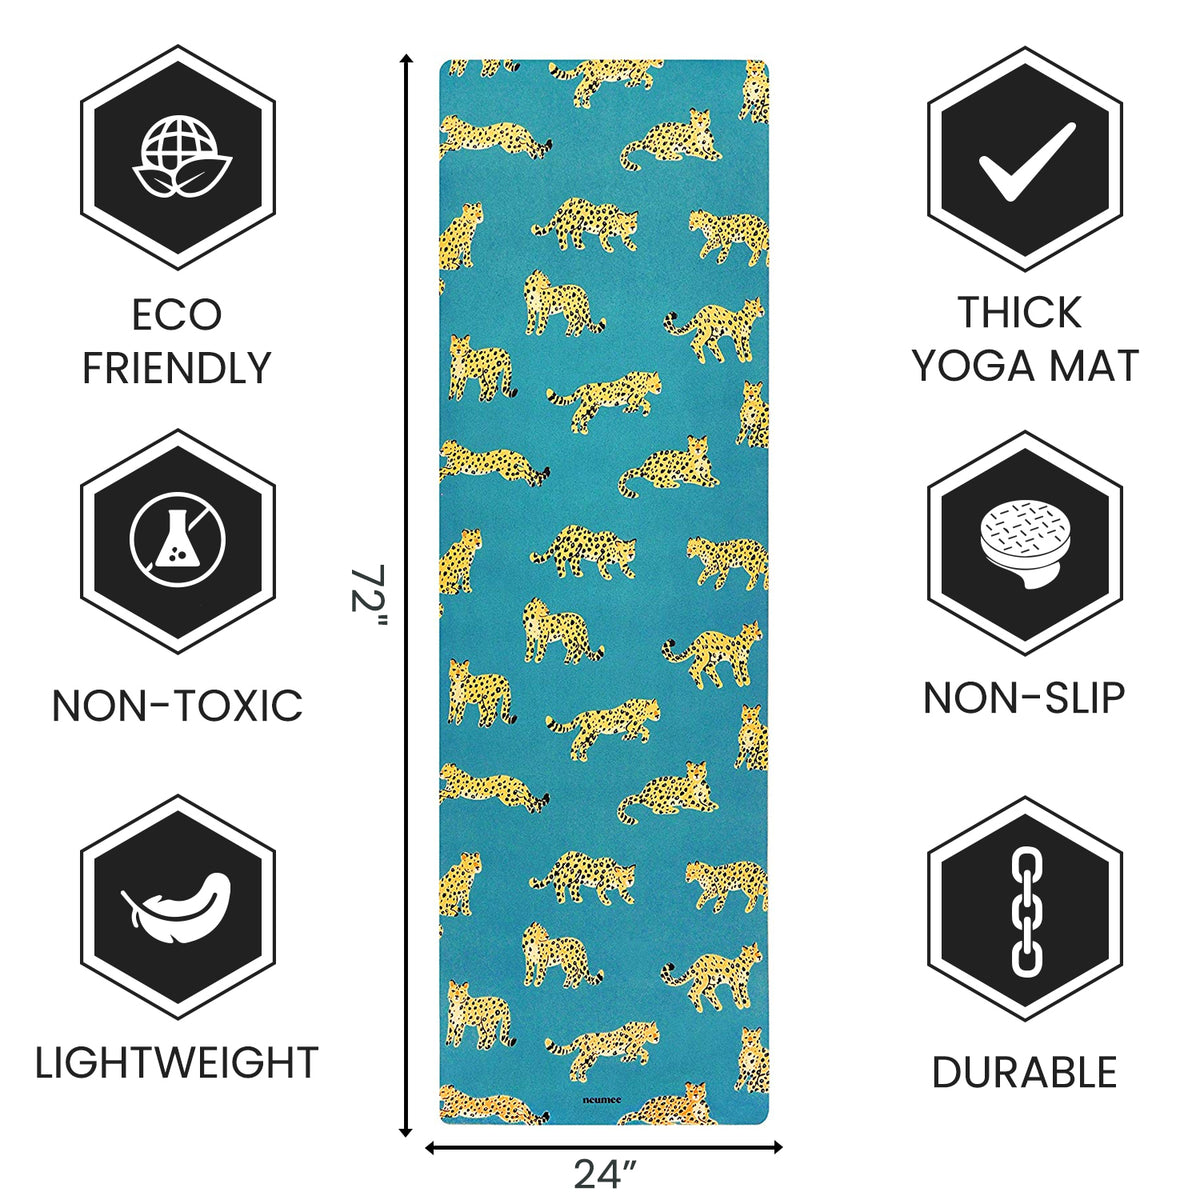 NEUMEE Exercise Yoga Mat with Carrying Strap for Women &Men, 1/8”(4mm)  Thickness, Designed in California for the New You